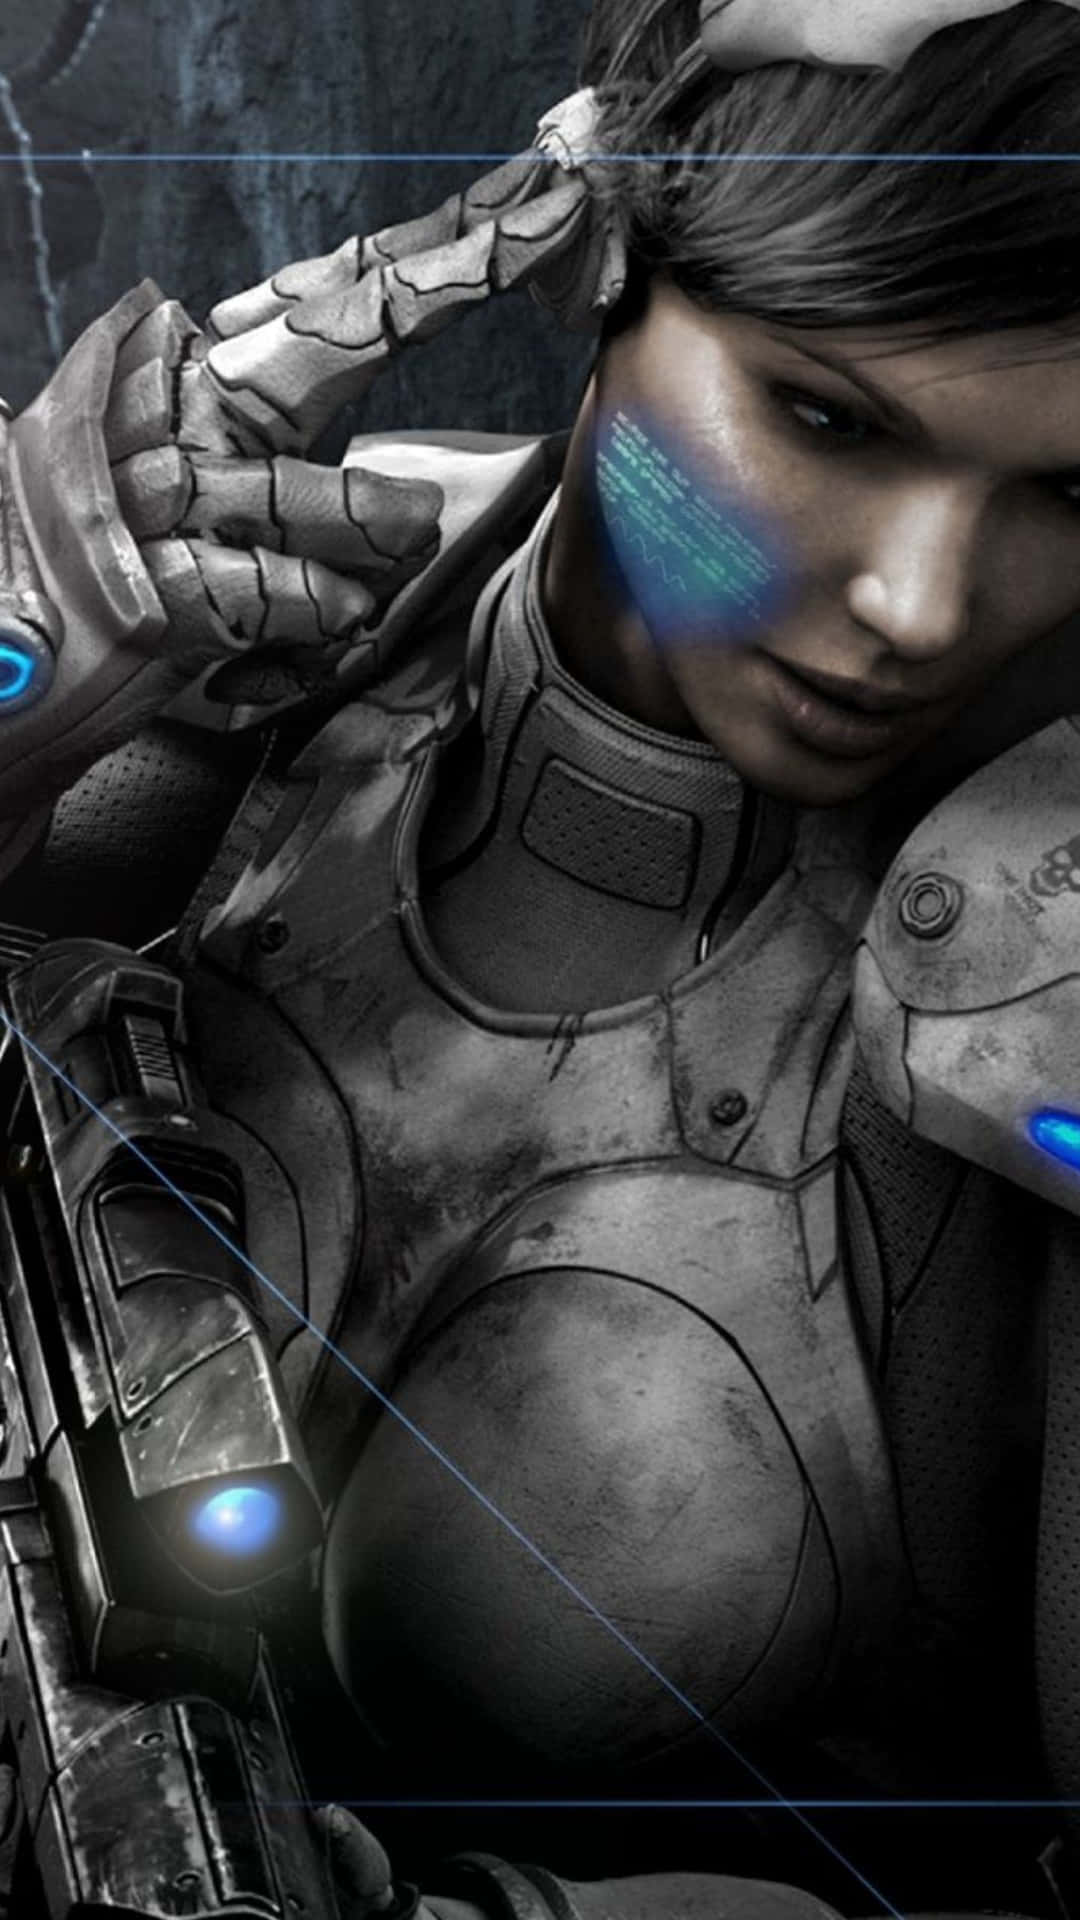 Image  An Android user enjoys playing Starcraft II